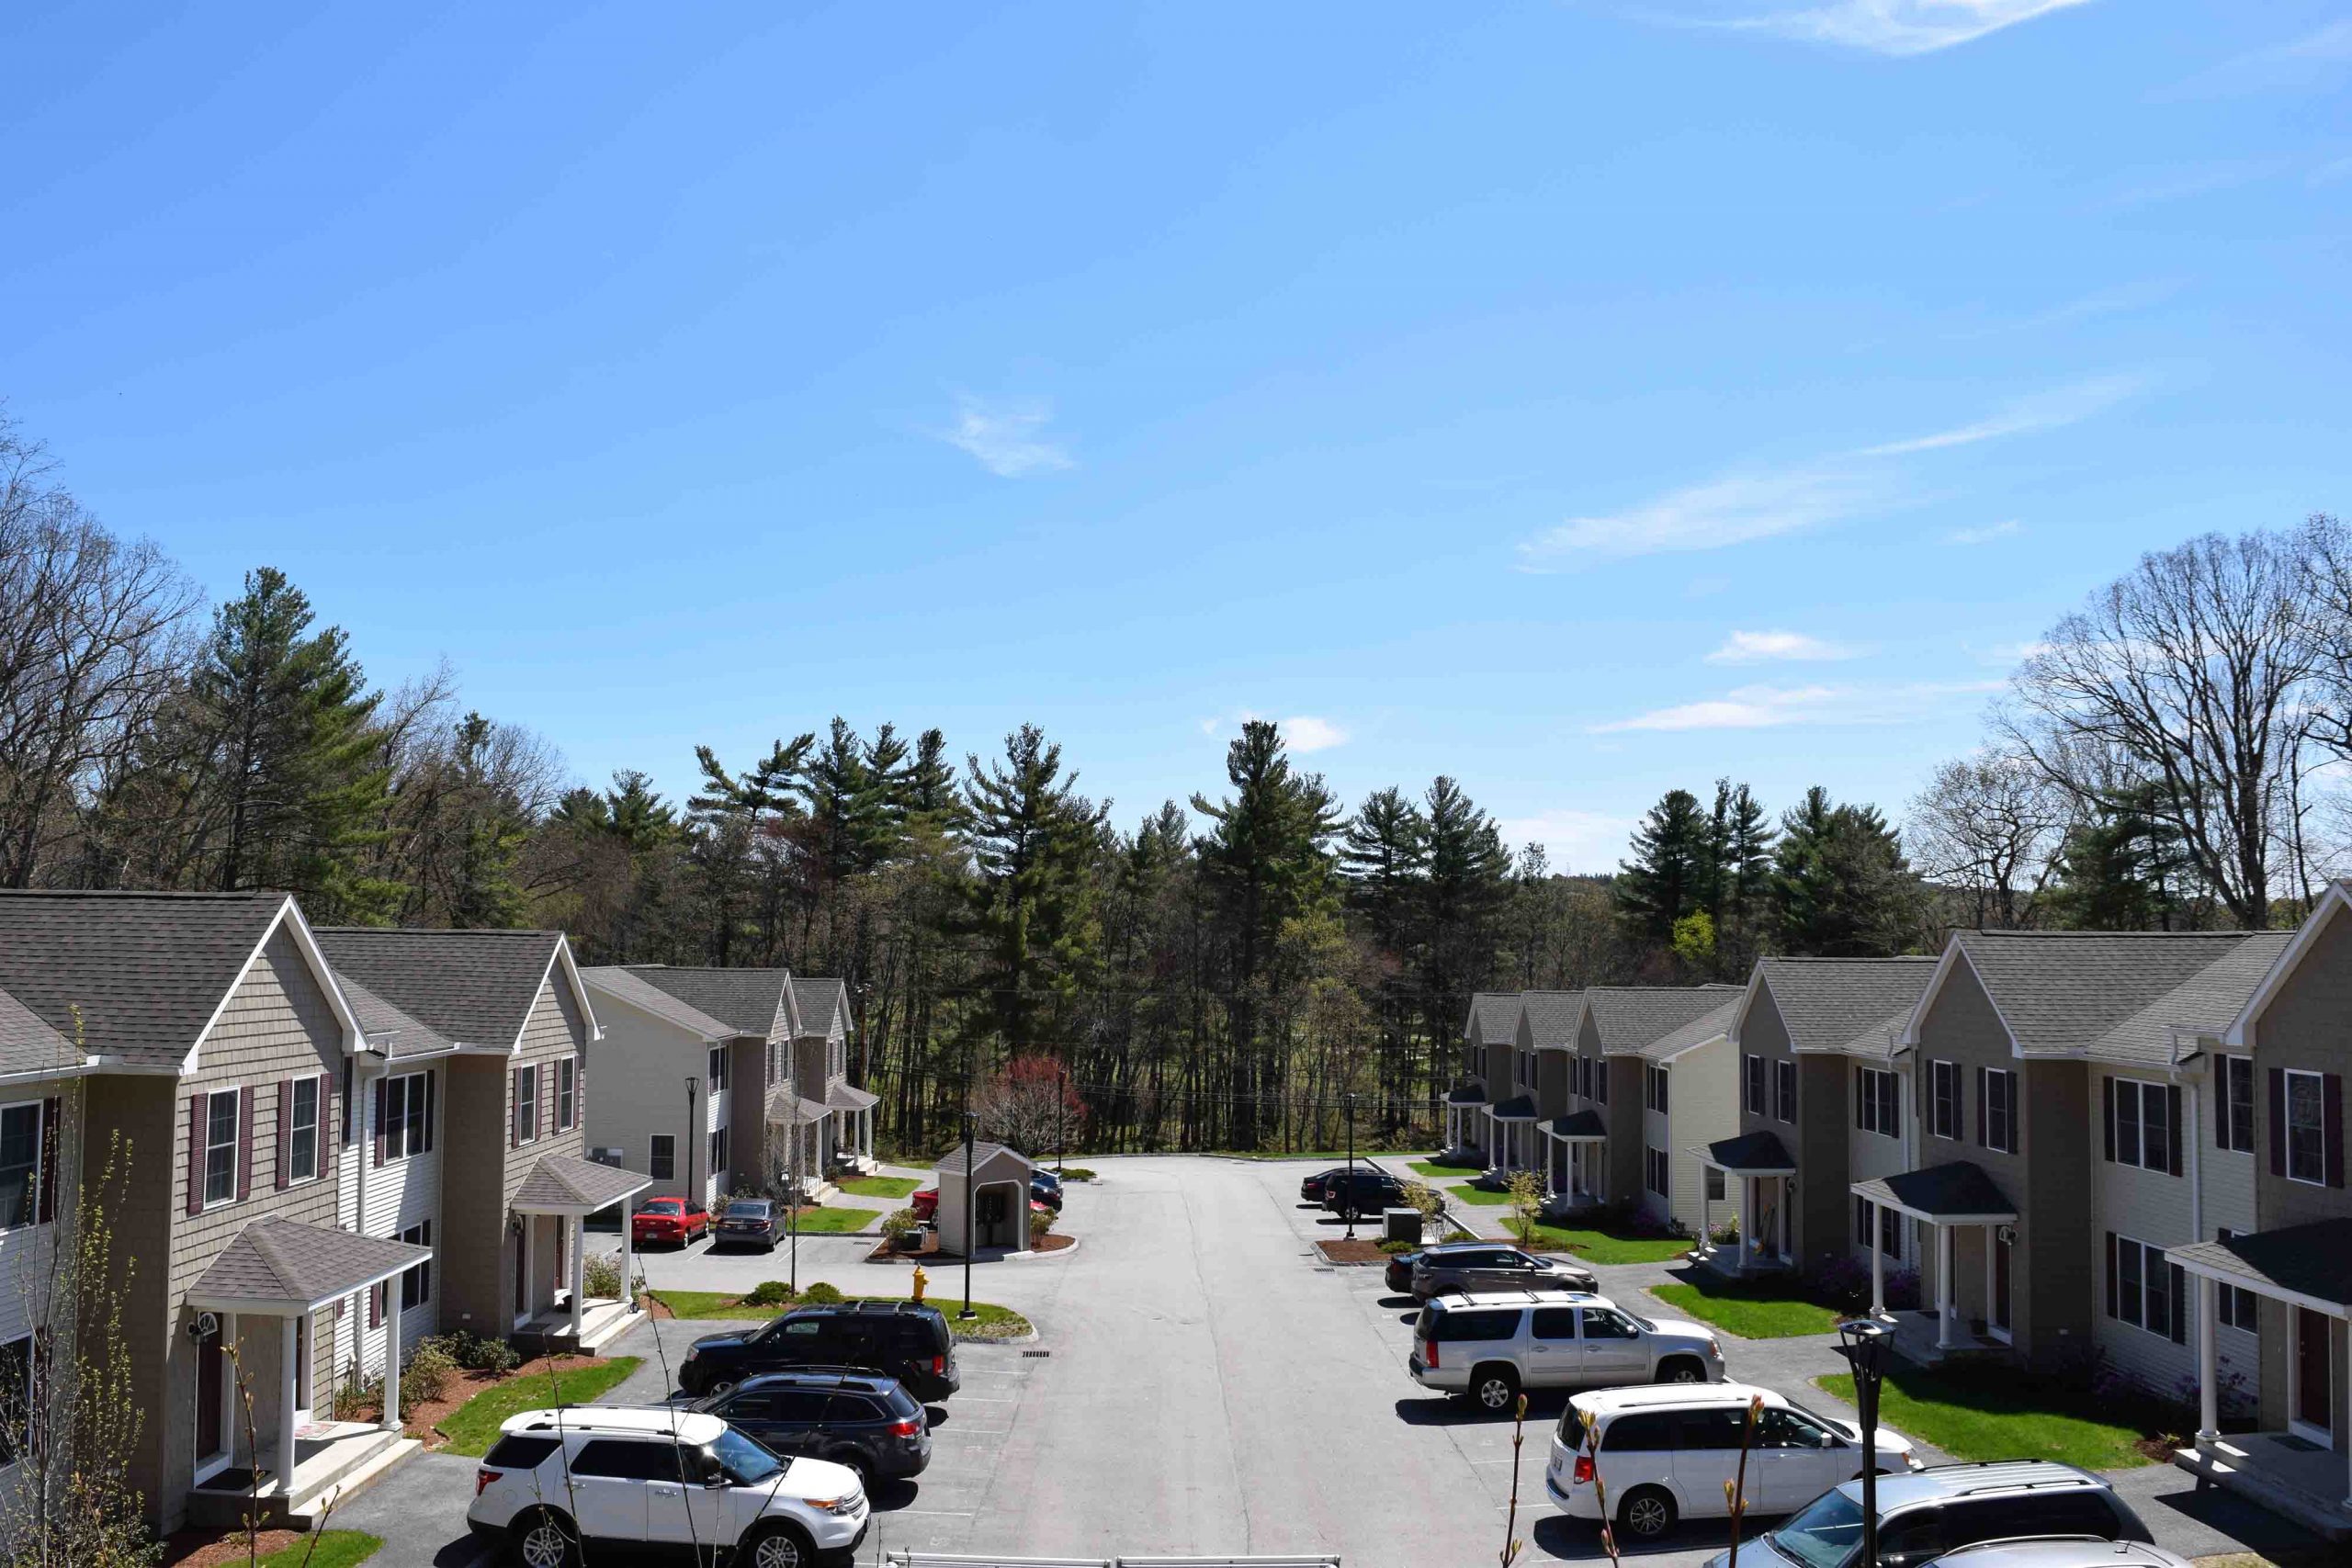 Stoneyview Way Community by Socha Companies is a quality townhouse community in Manchester, NH